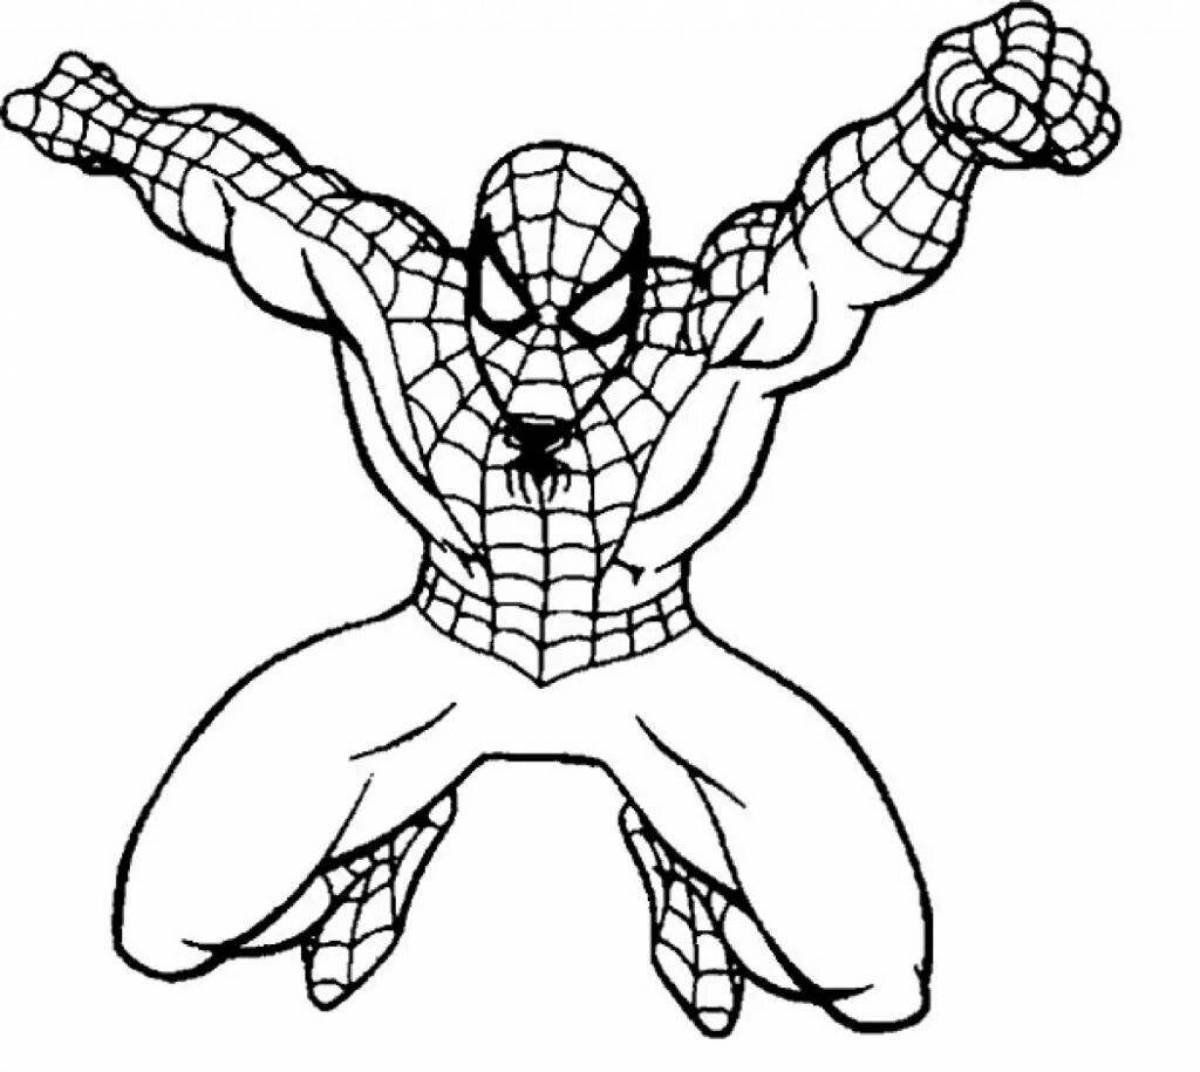 Creative drawing of spider man